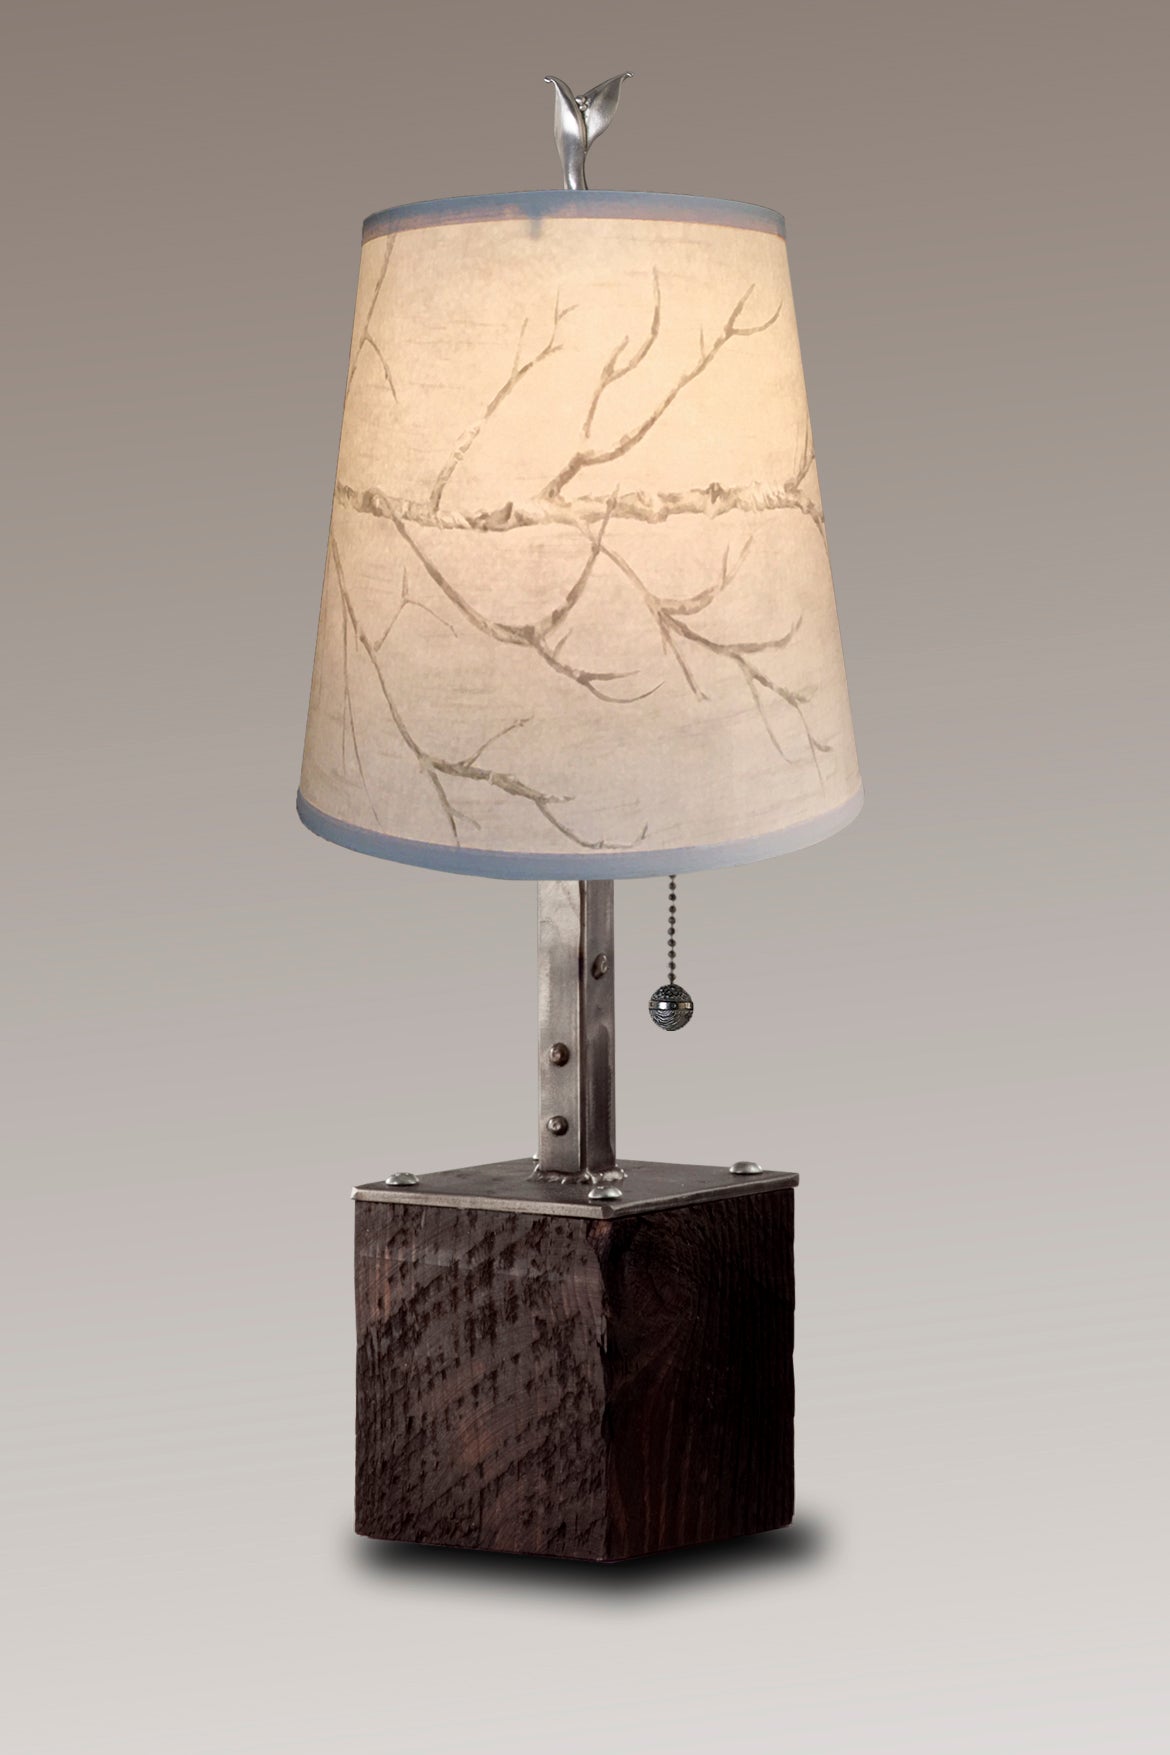 Janna Ugone & Co Table Lamps Steel Table Lamp on Reclaimed Wood with Small Drum Shade in Sweeping Branch